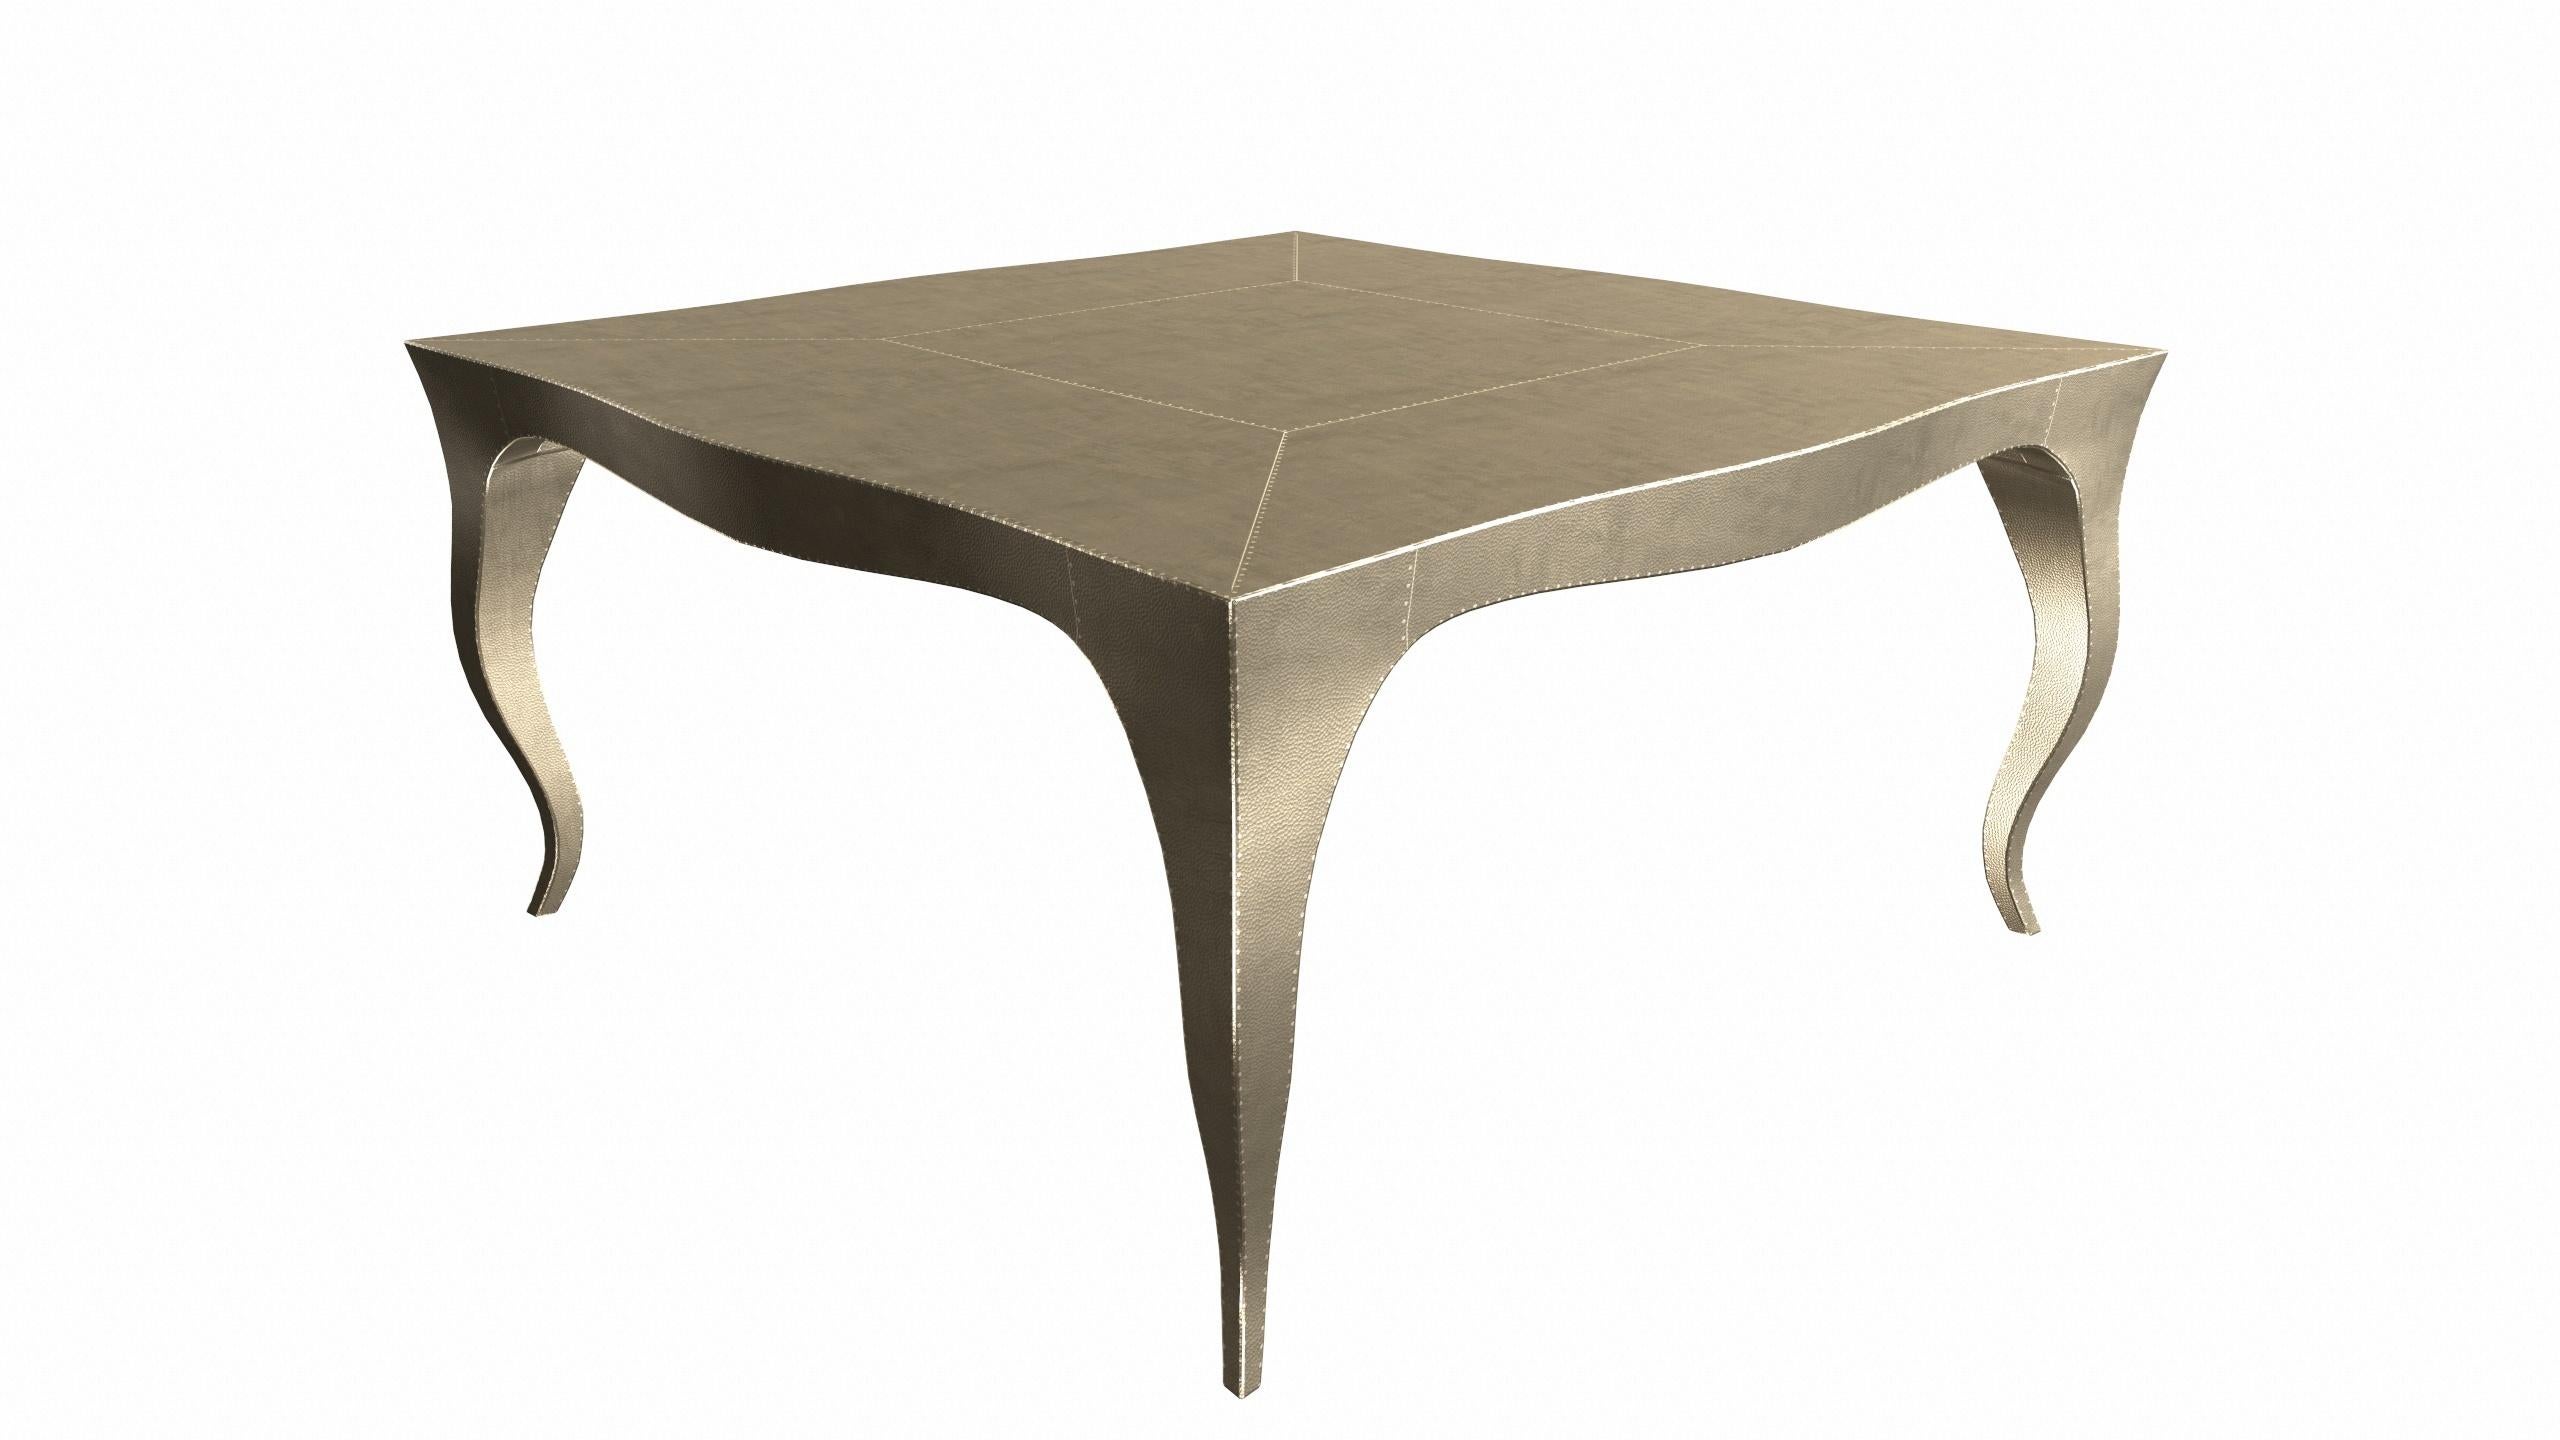 Other Louise Art Deco Center Tables Mid. Hammered Brass 18.5x18.5x10 inch For Sale